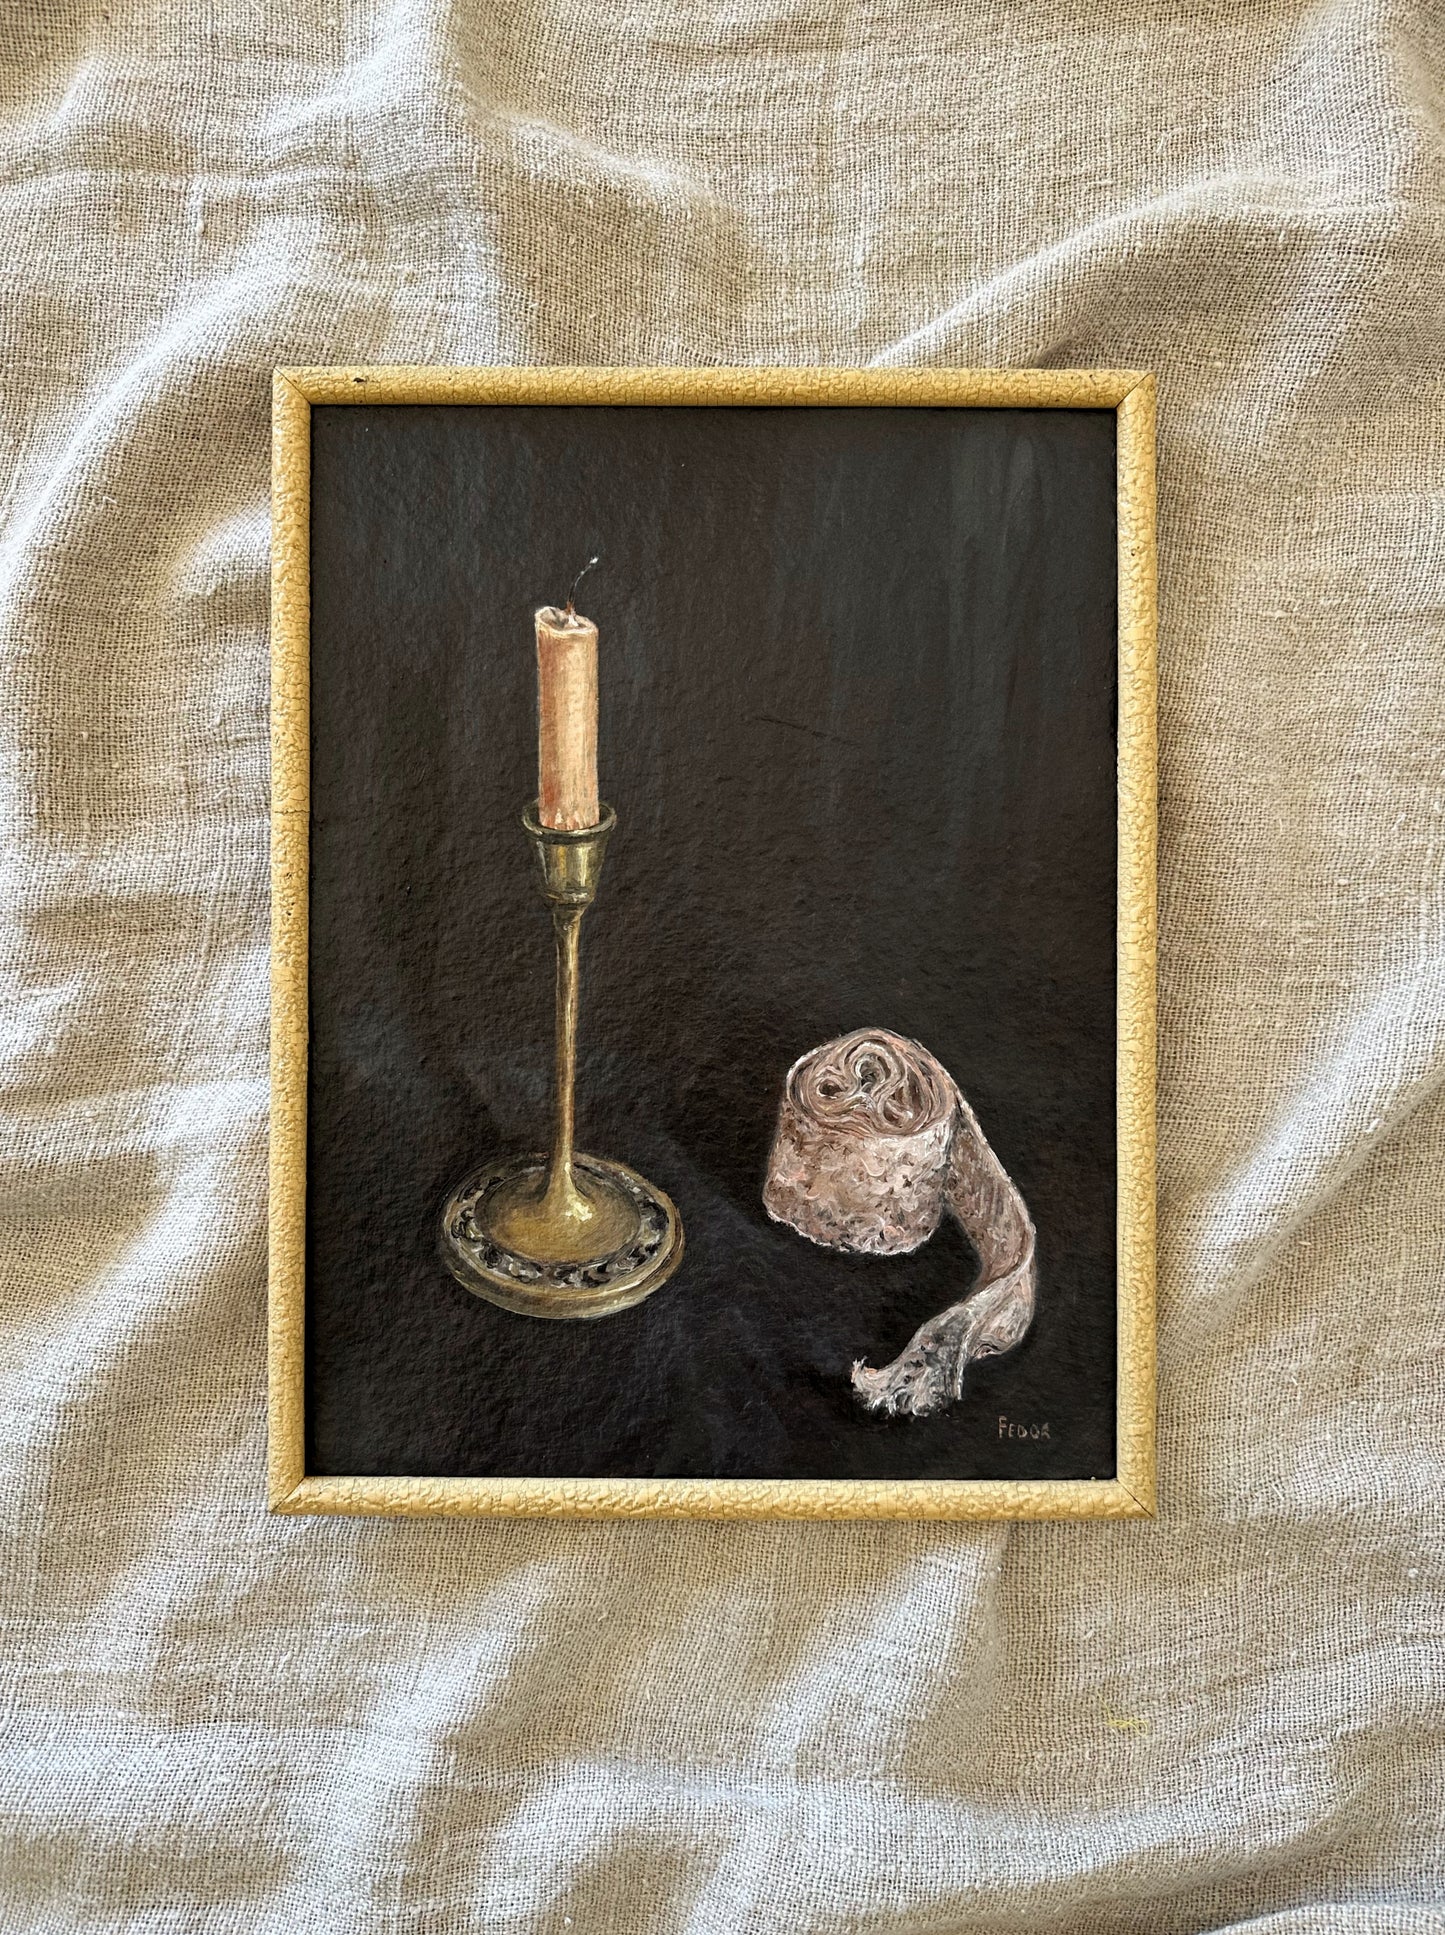 Rose Candle with French Lace